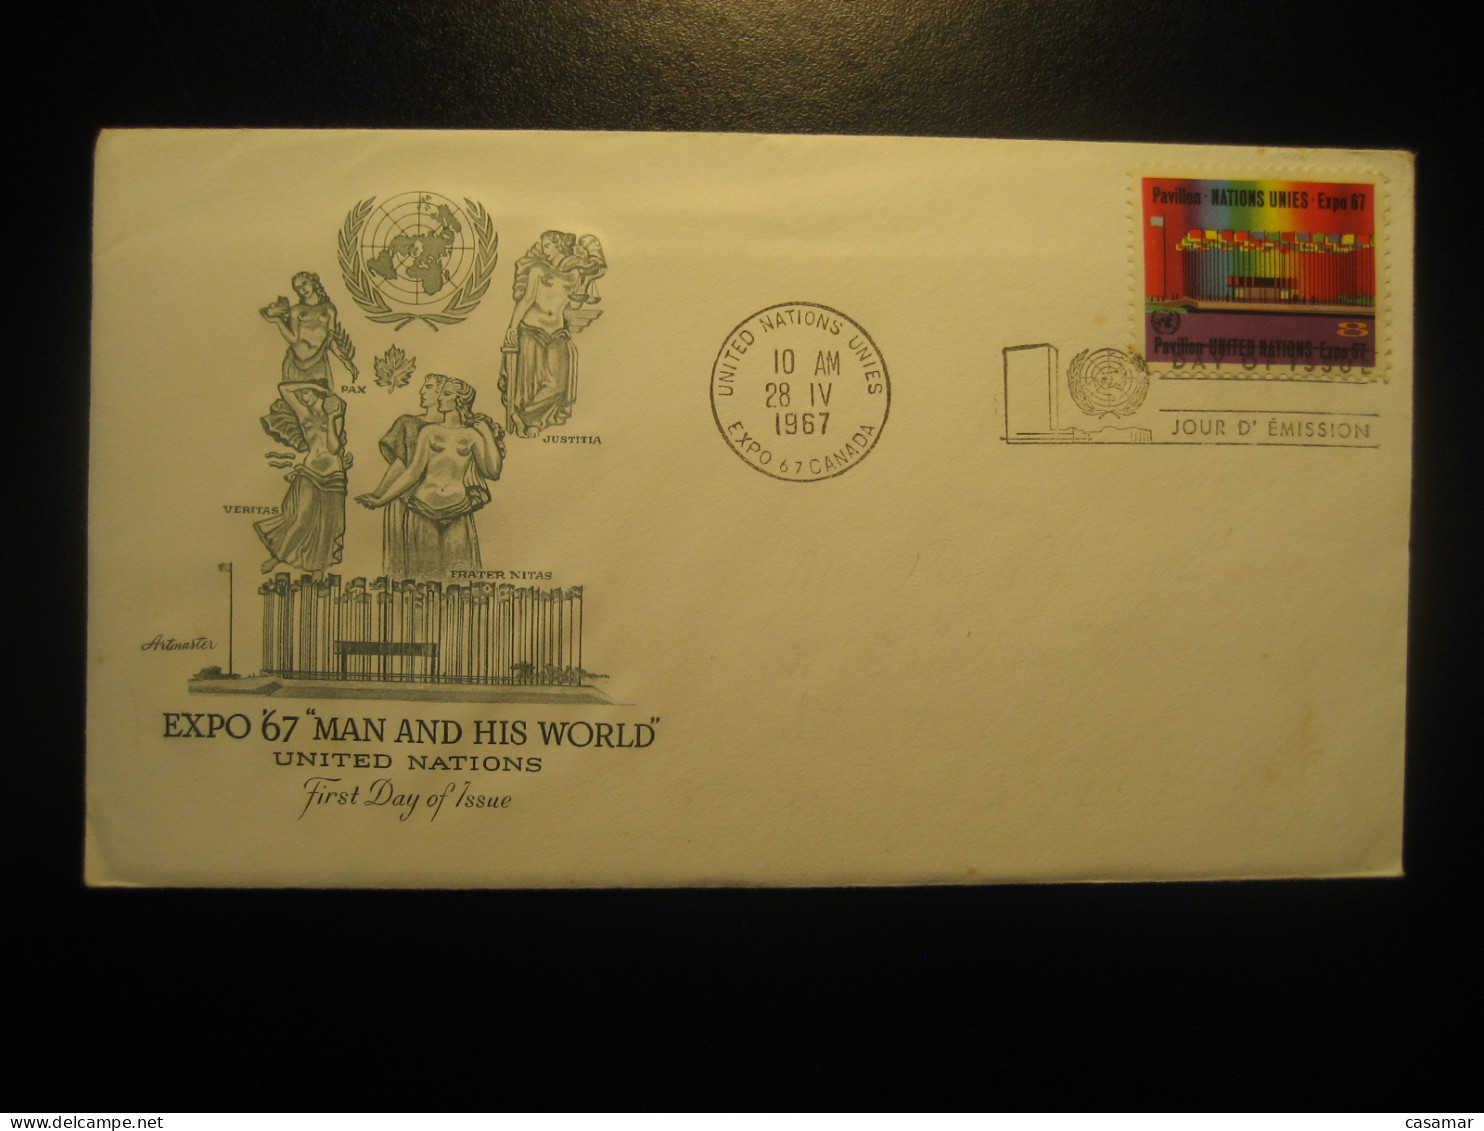 EXPO 67 CANADA Montreal 1967 United Nations Peace Truth Justice Fraternity FDC Cancel Cover UN NATIONS UNIES - Covers & Documents